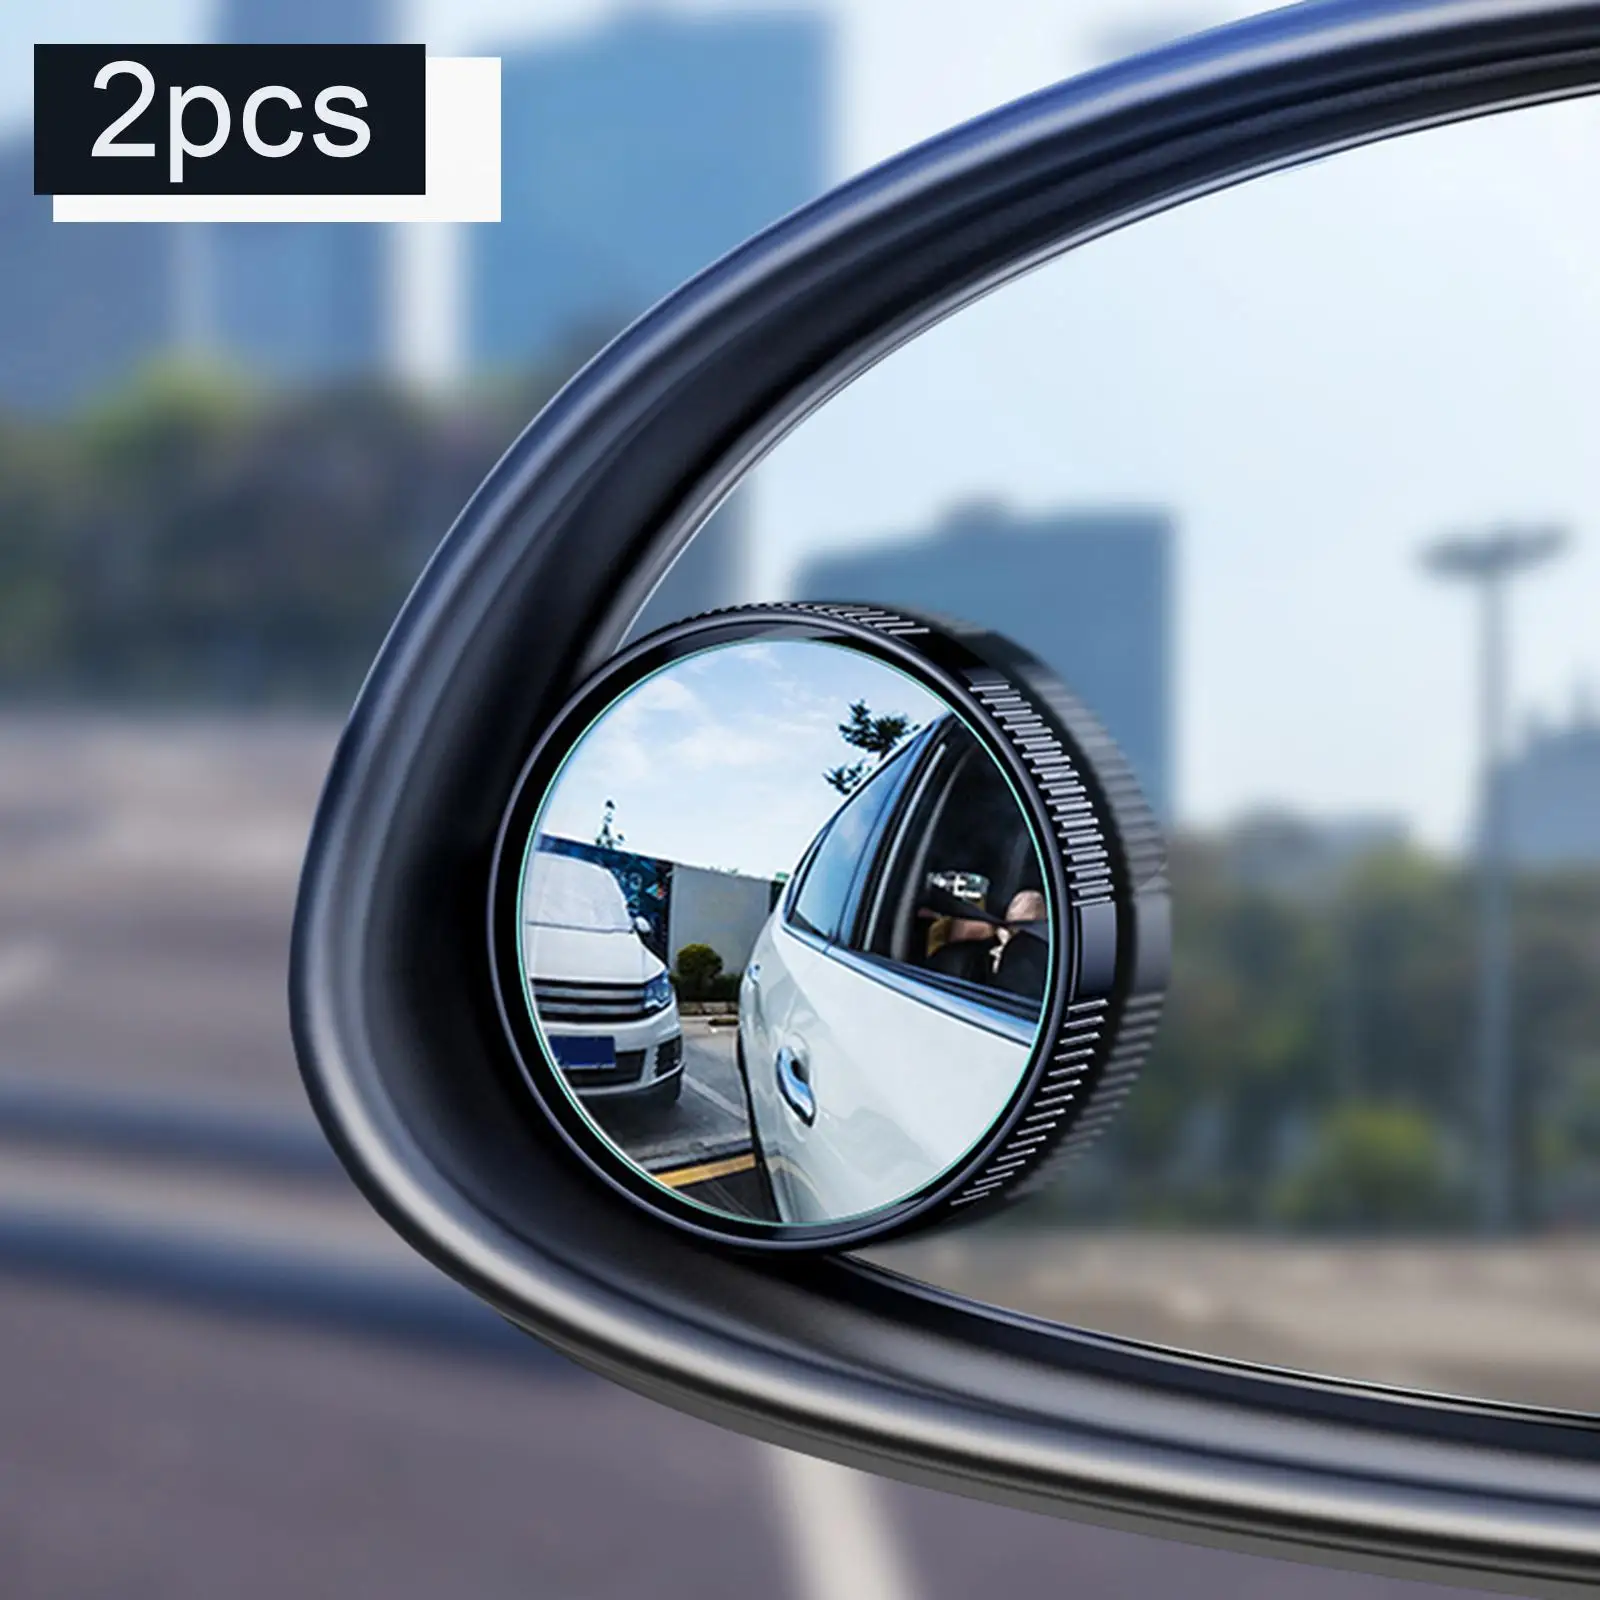 2Pcs  Spot Mirrors ABS Housing for Cars Motorcycles Accessories